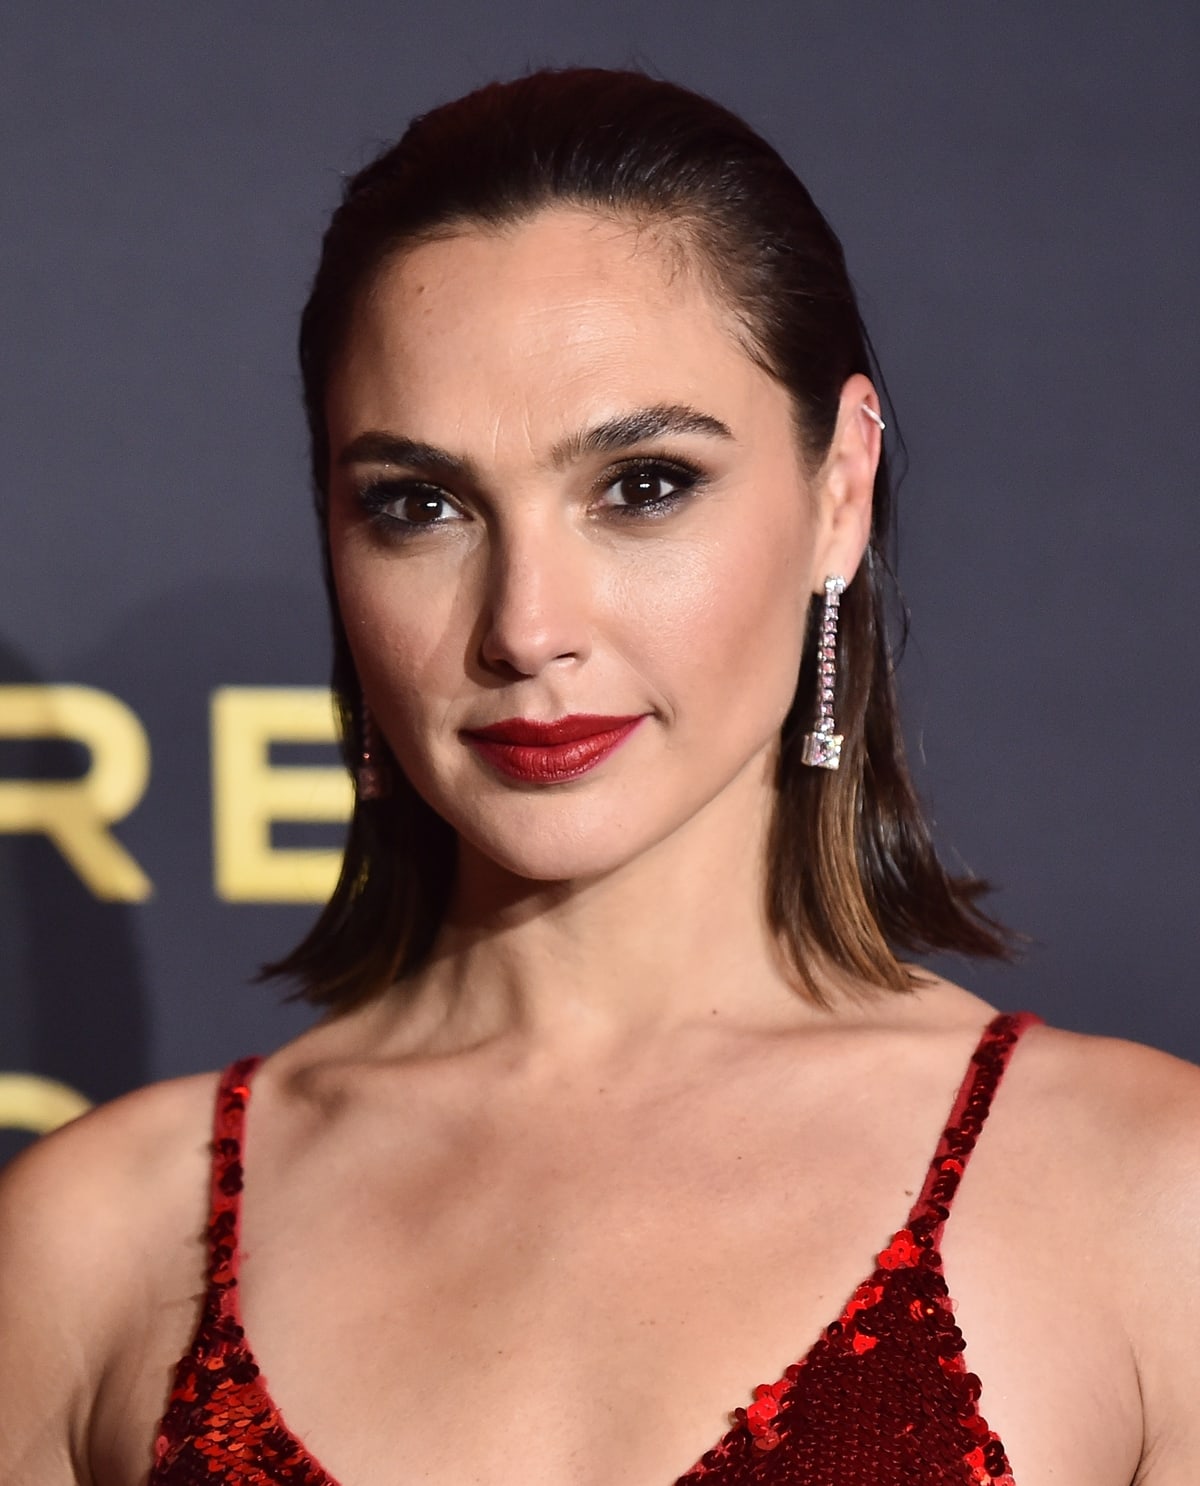 Gal Gadot has light brown eyes and can speak Hebrew, English, and Arabic